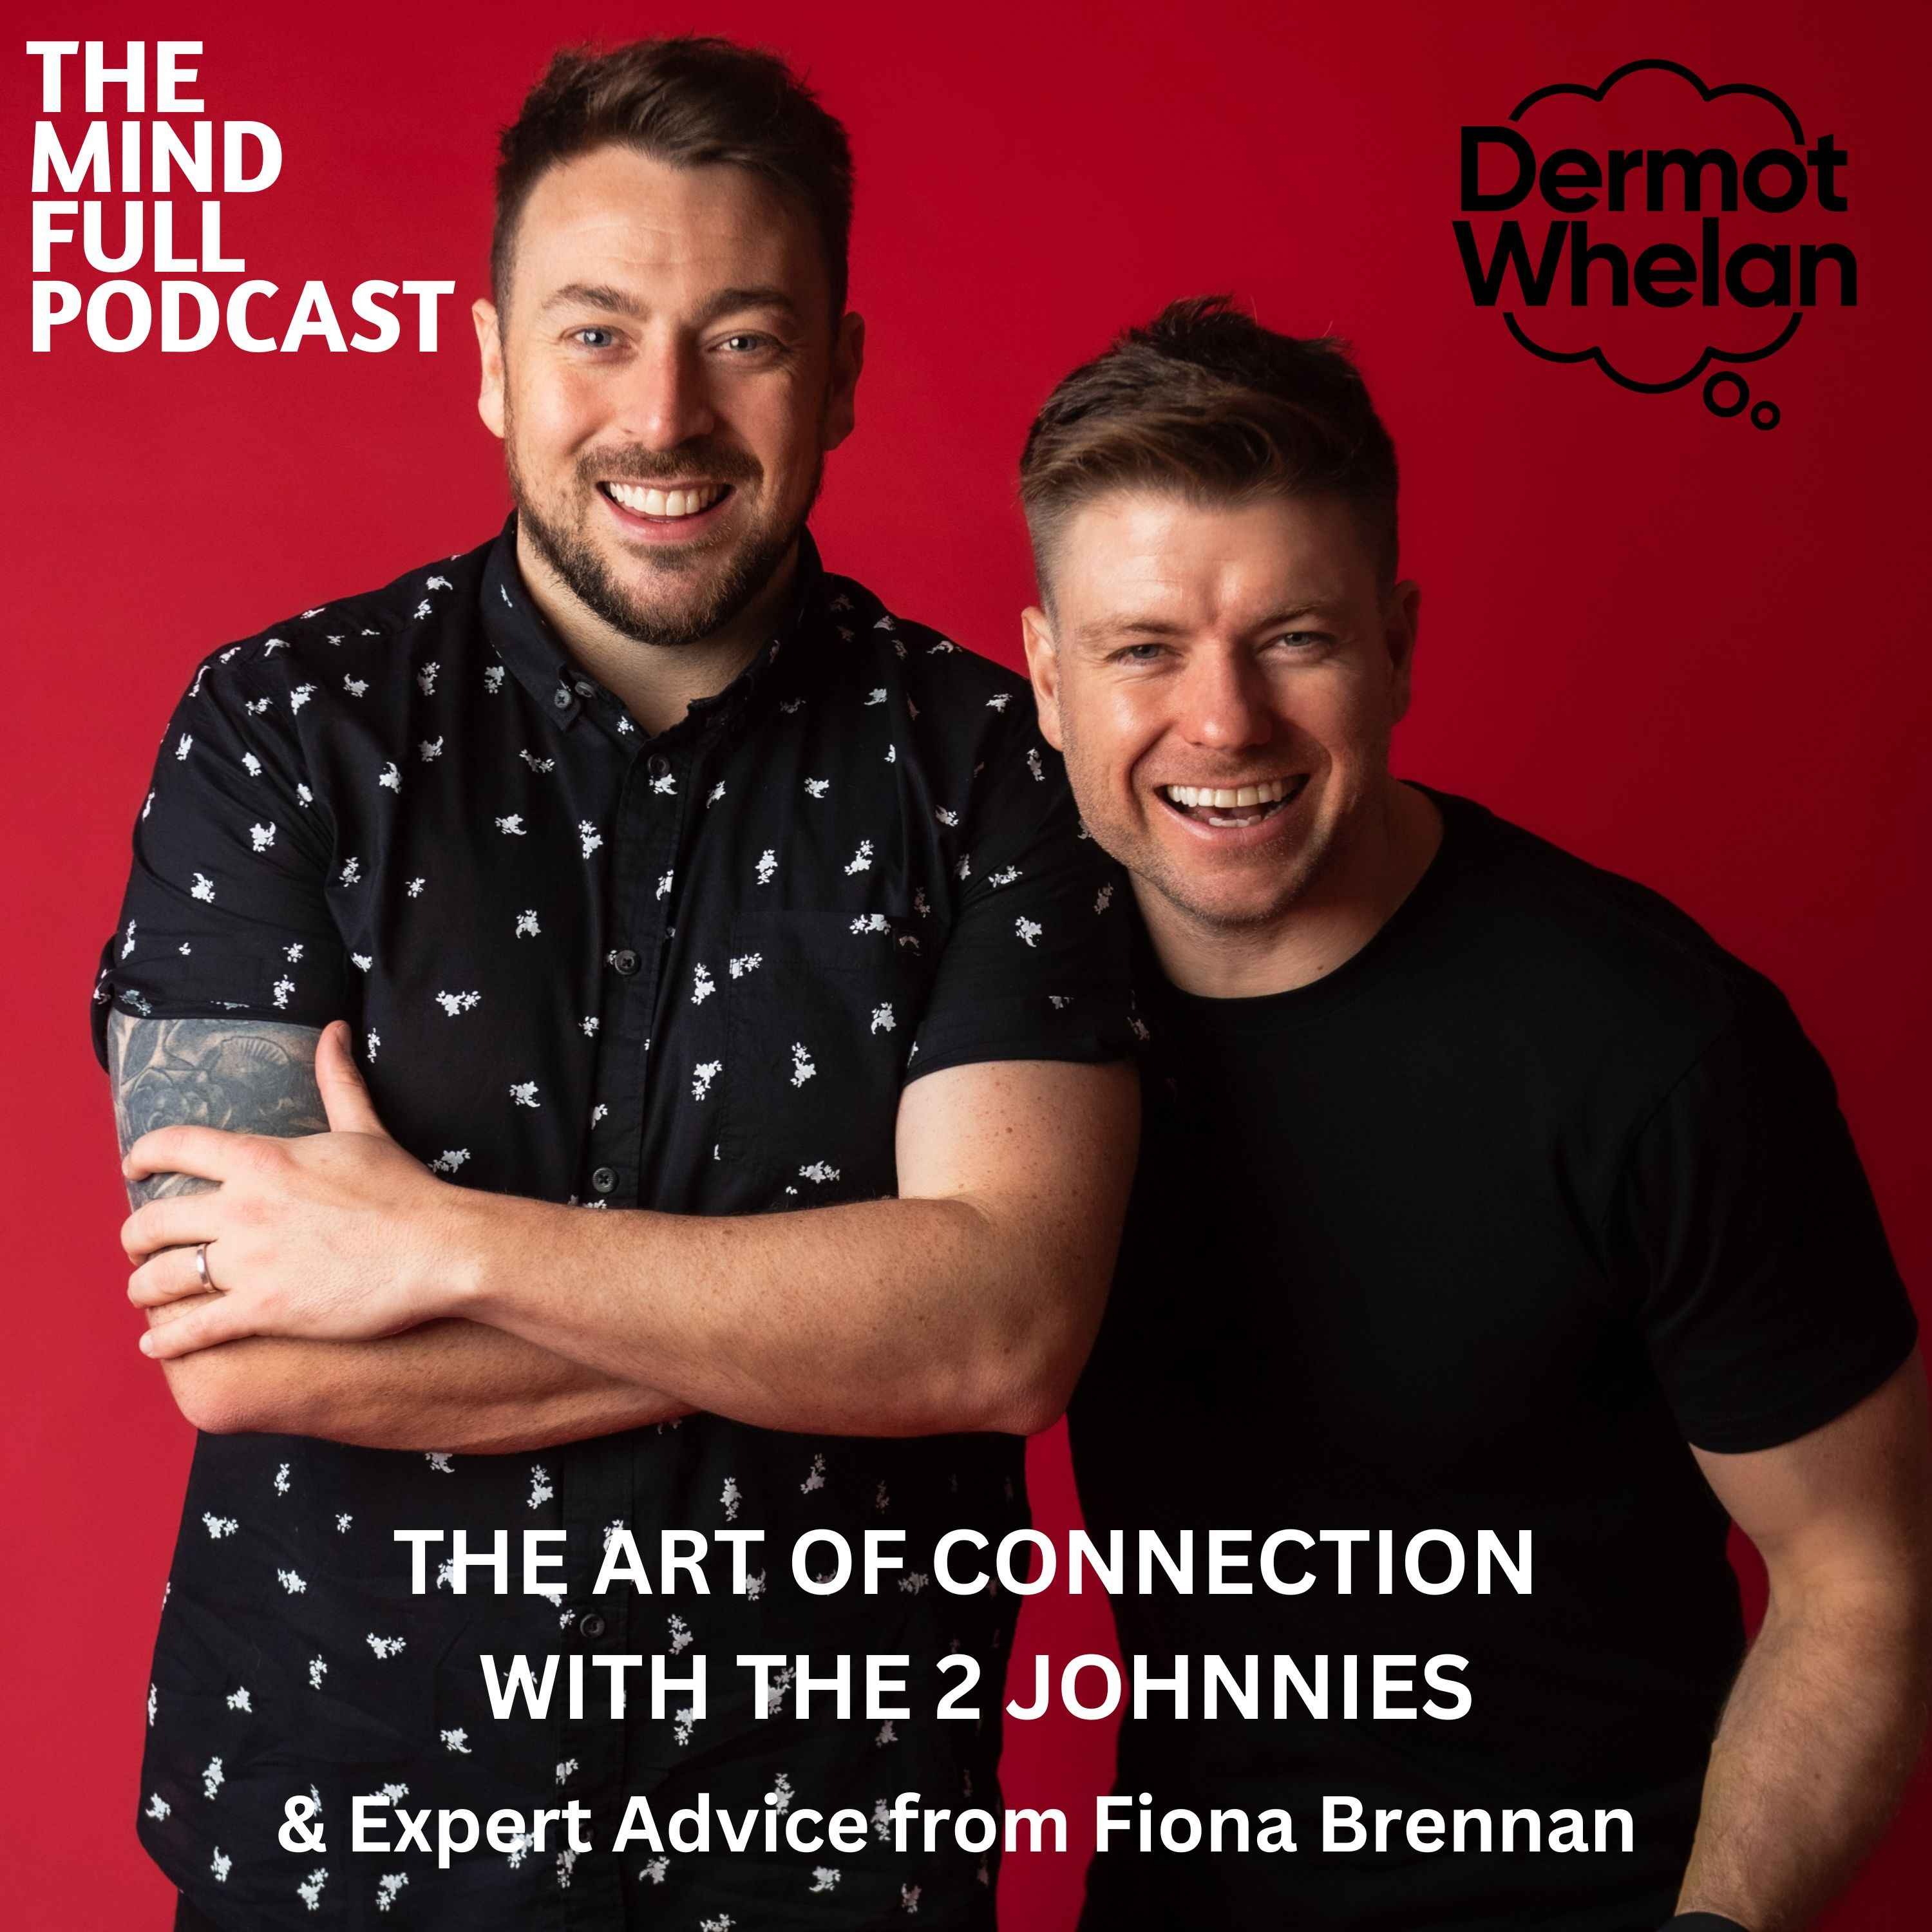 The Art of Connection with The 2 Johnnies